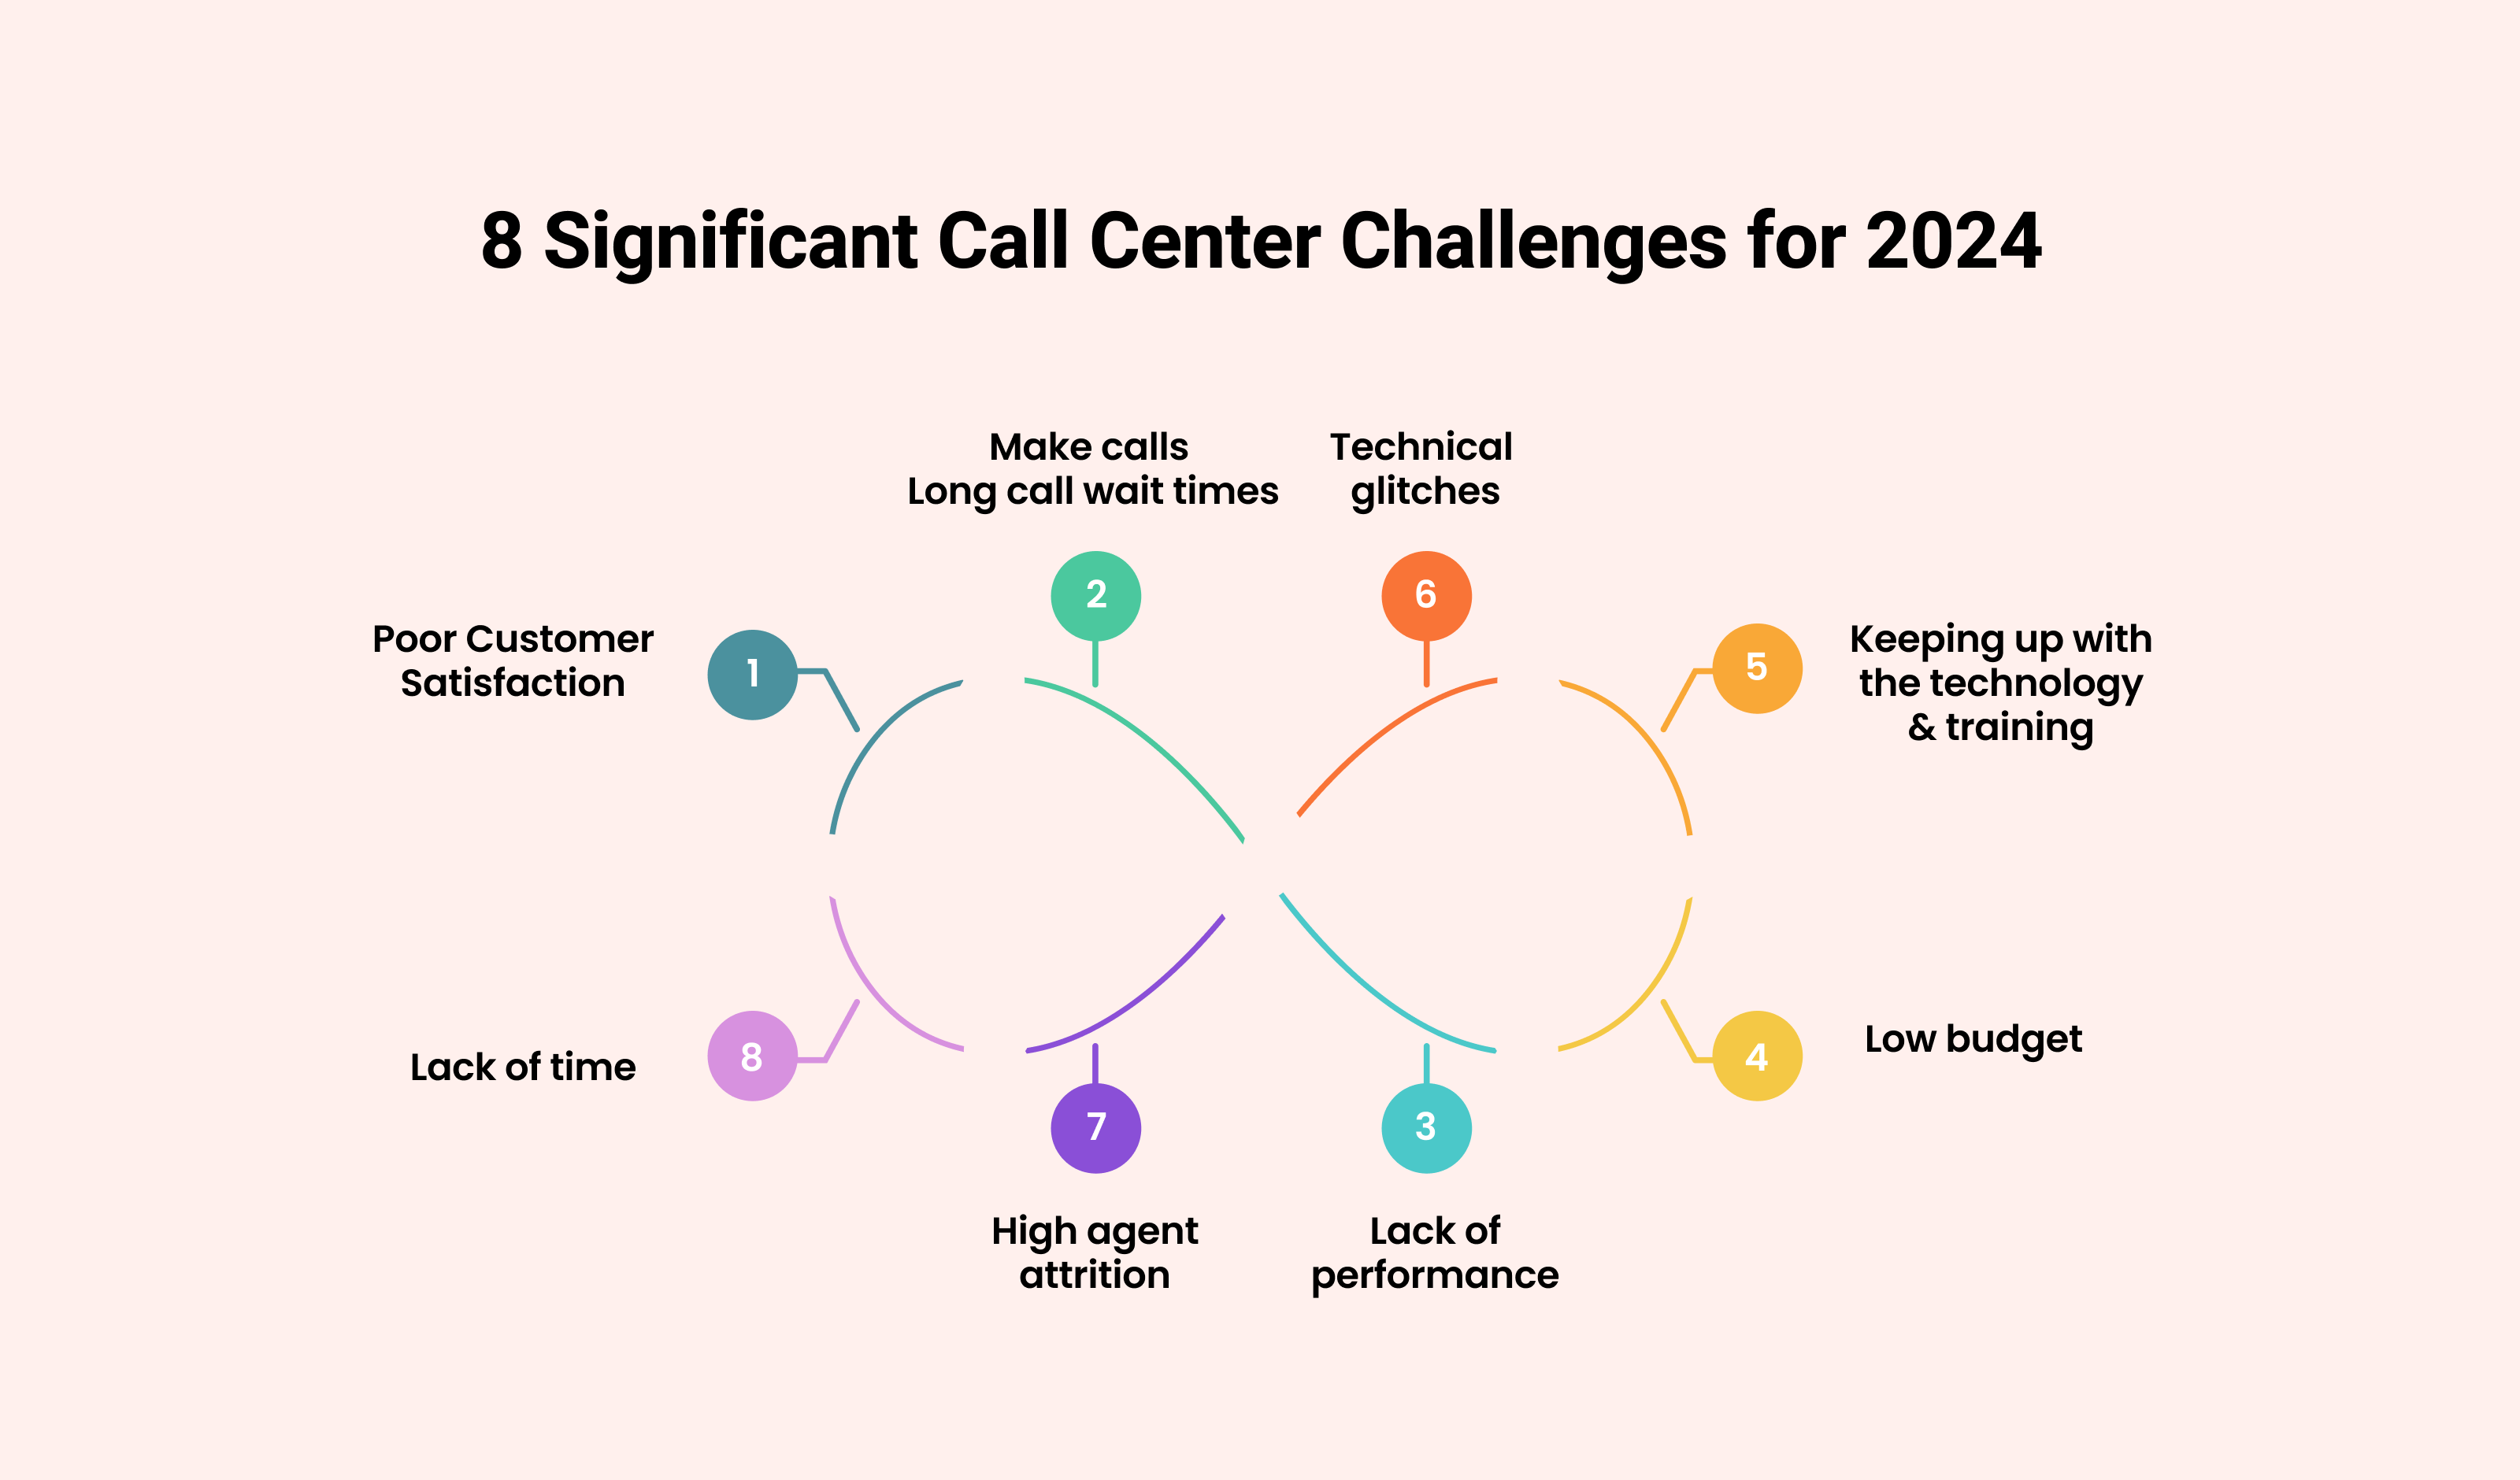 8 Significant Call Center Challenges for 2024: